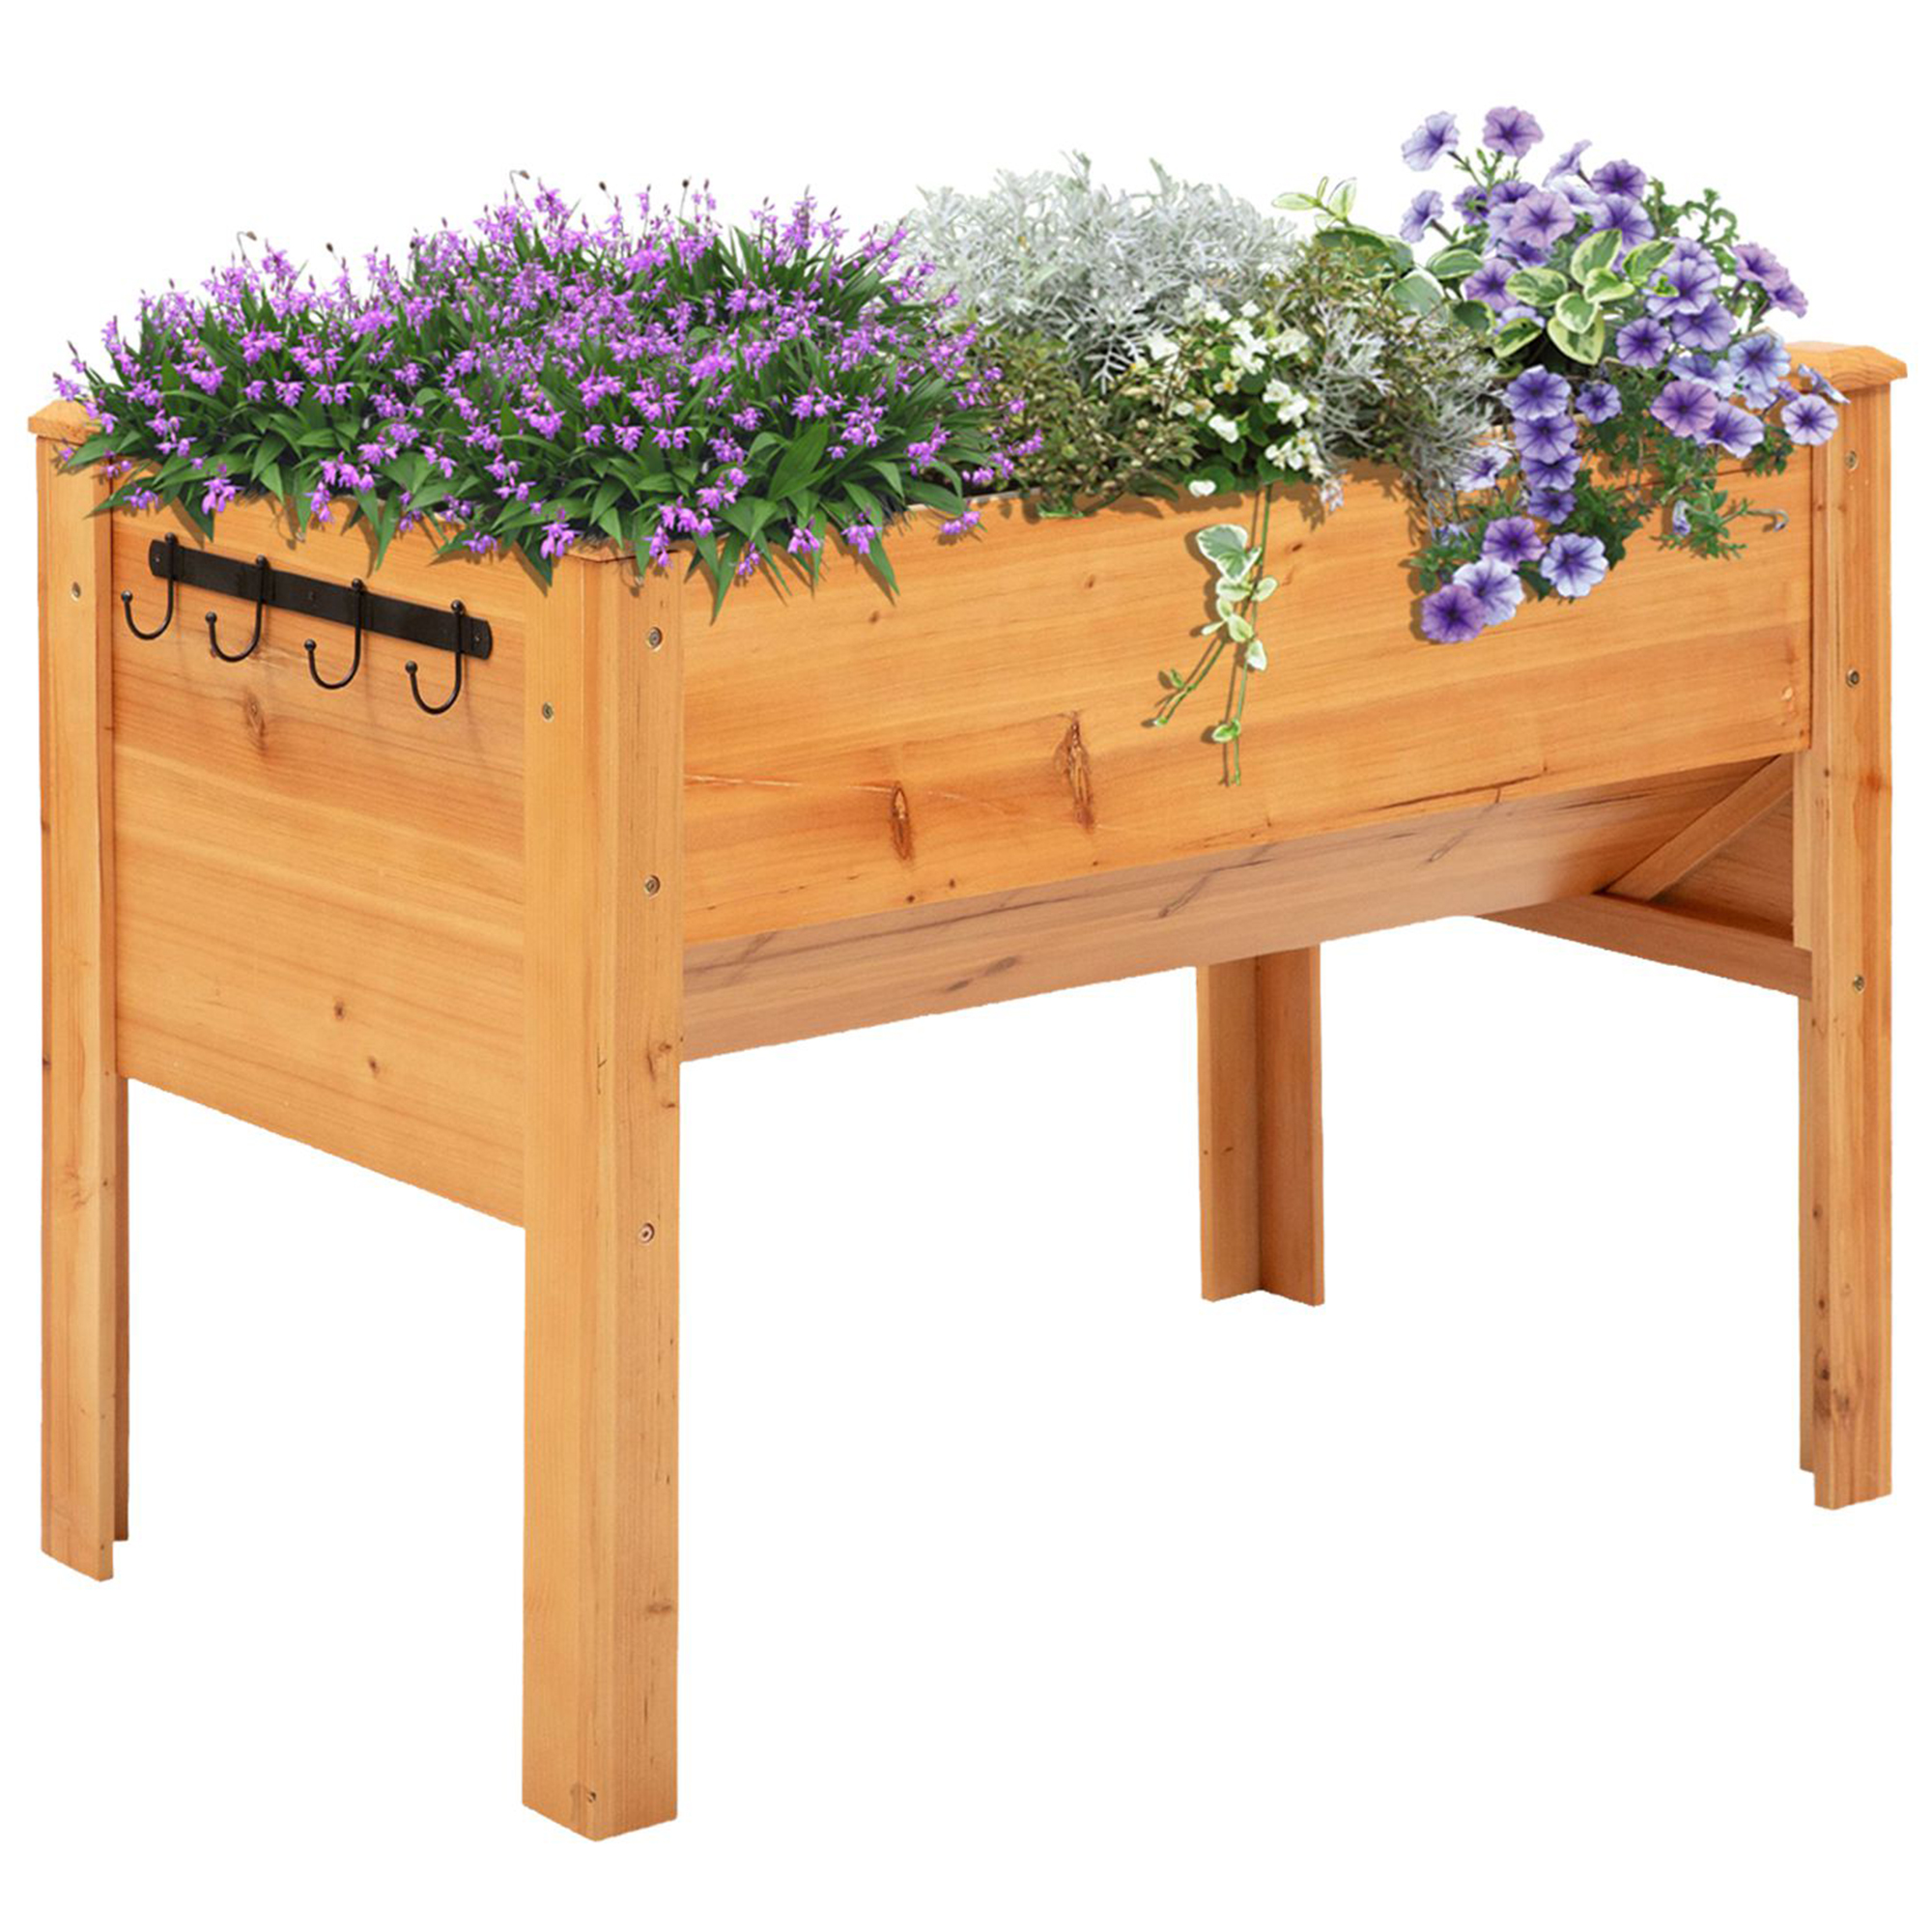 Stand Outdoor Tall Flower Bed Box